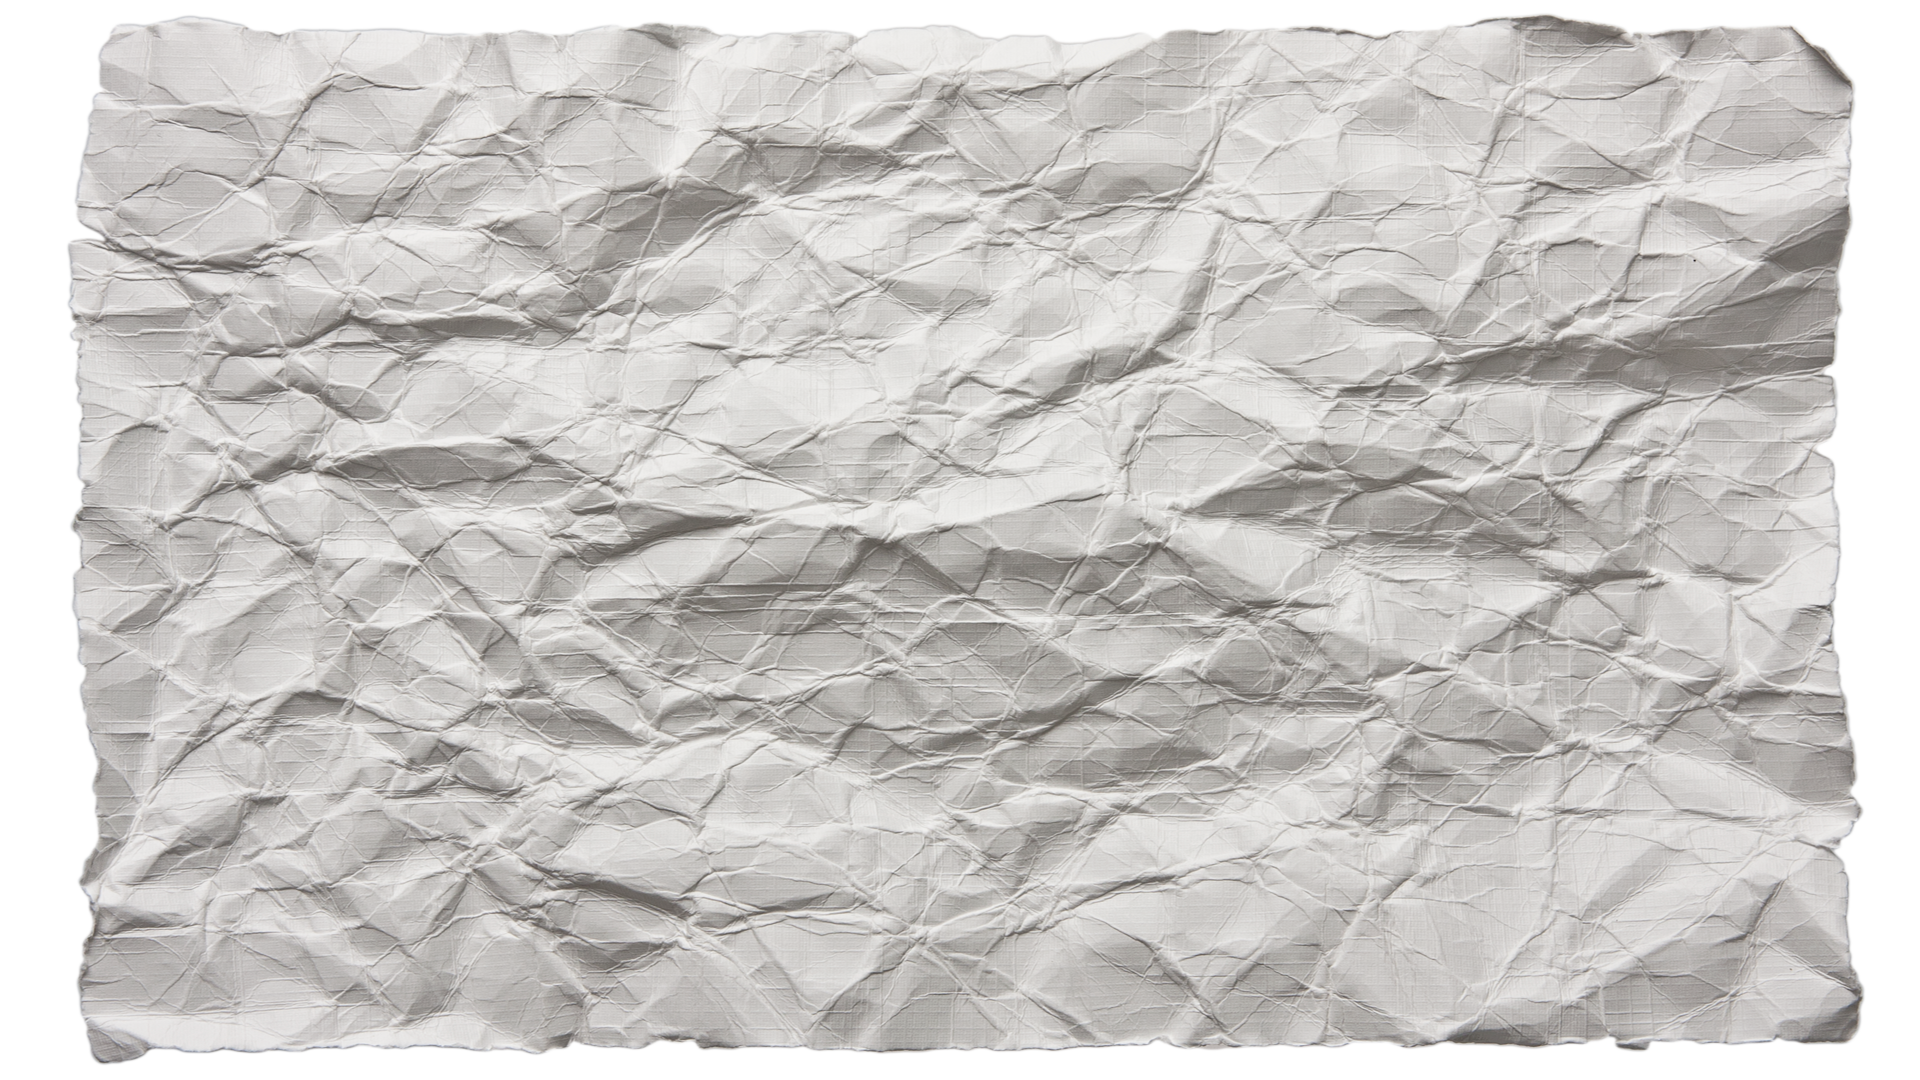 Wrinkled White Cotton Fabric Texture Background Wallpaper Stock Photo -  Download Image Now - iStock